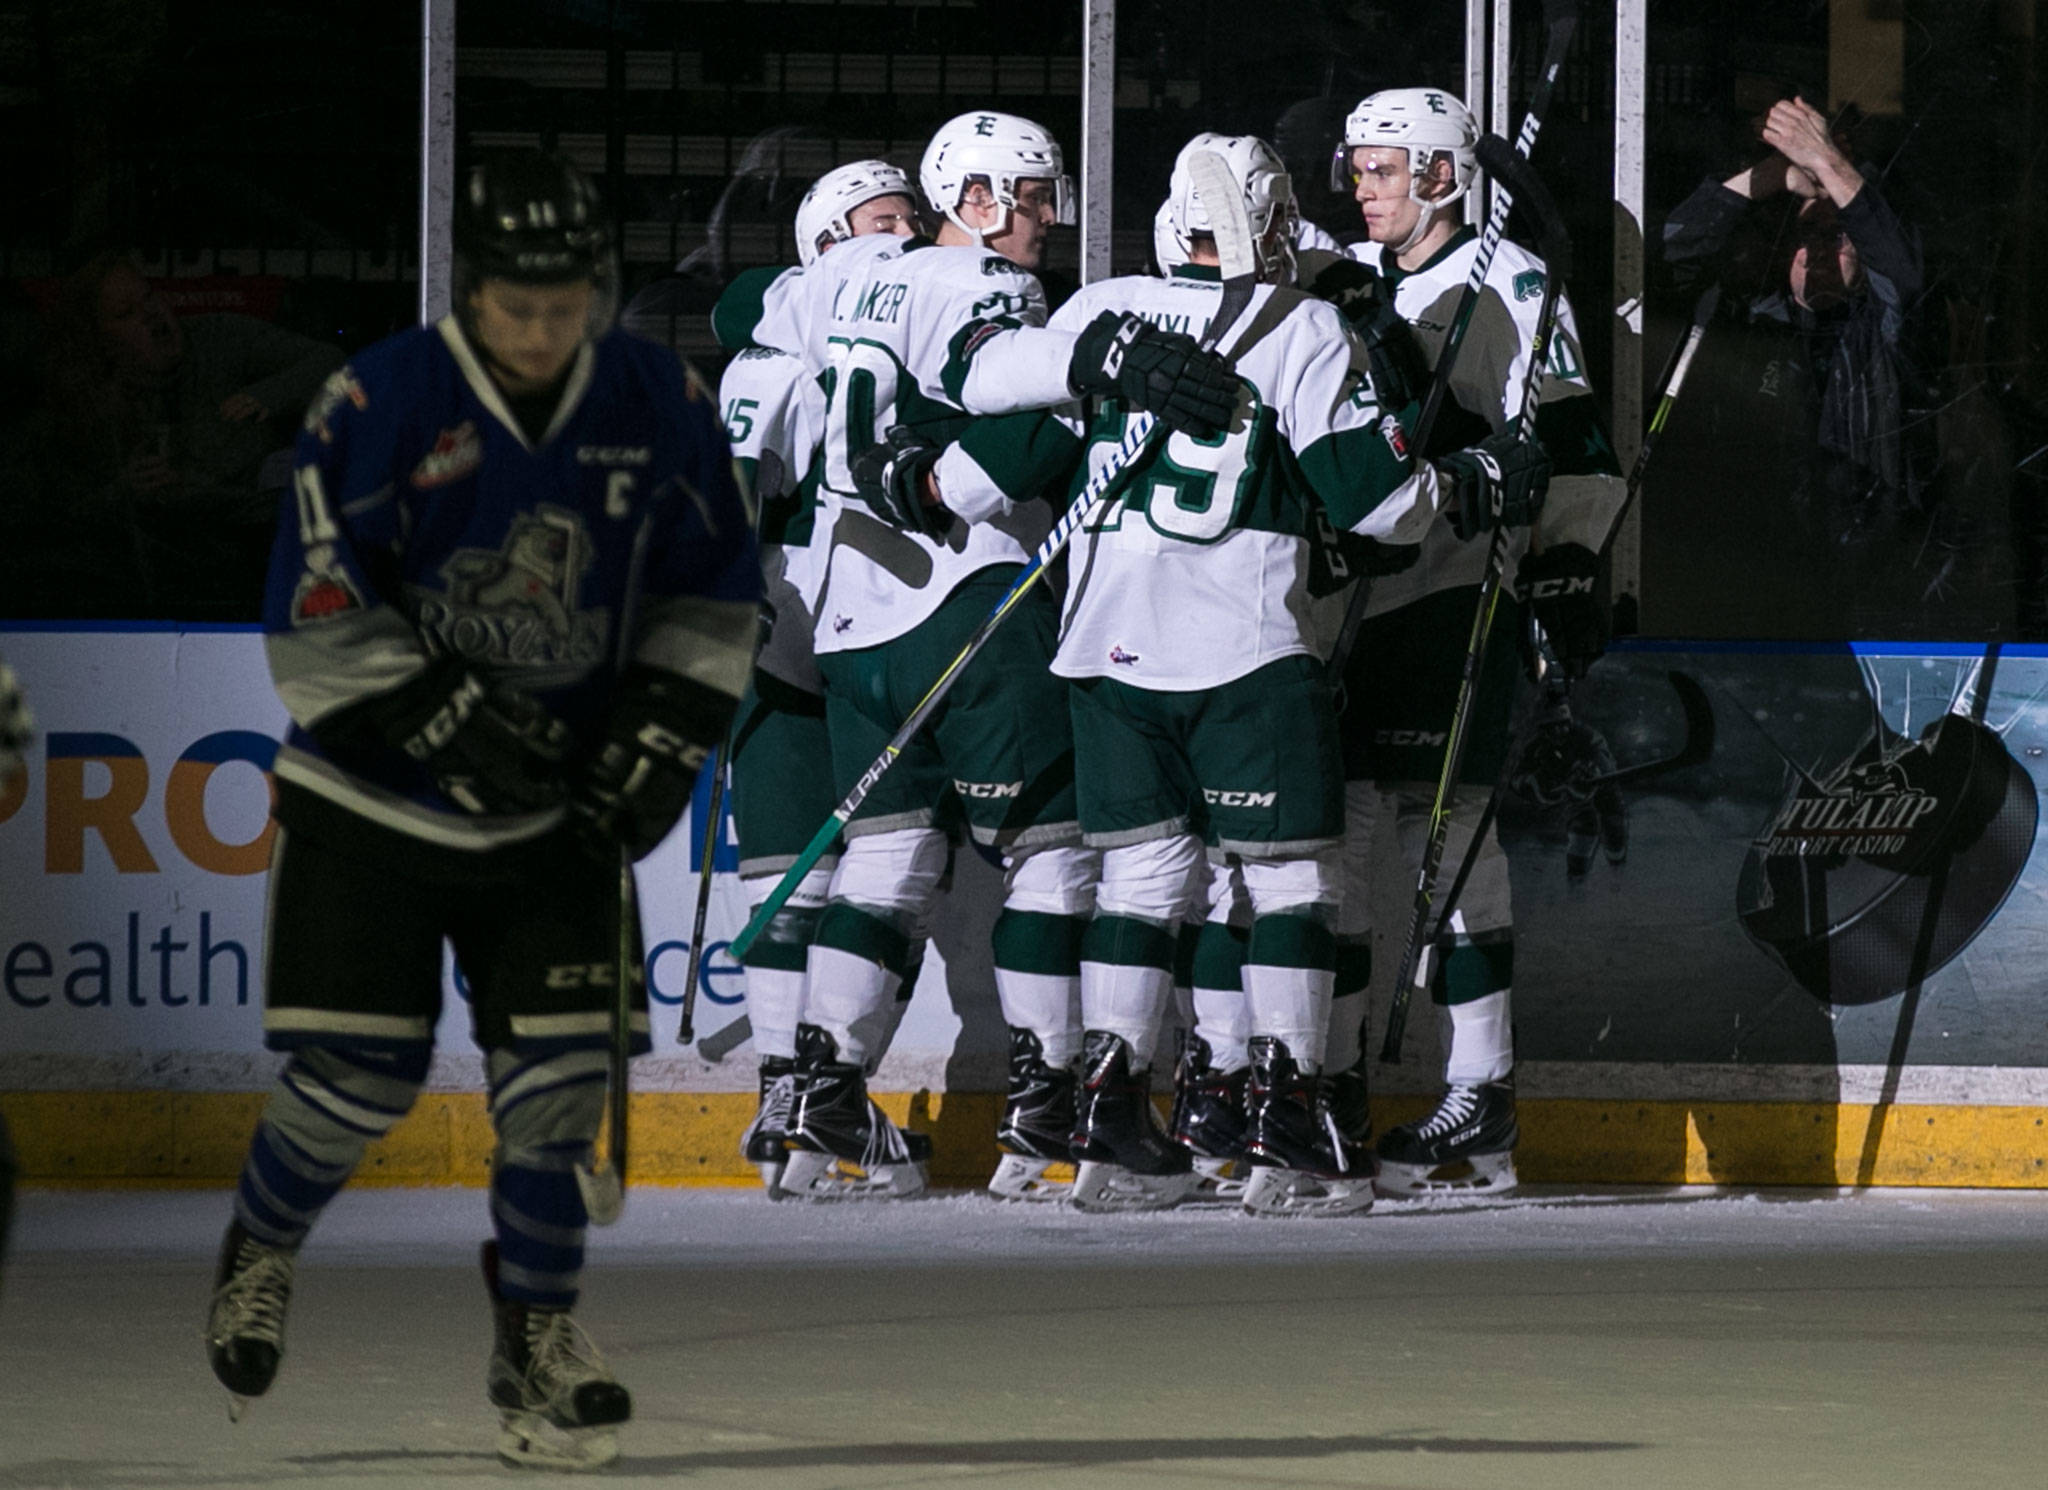 The Everett Silvertips celebrate a goal with Victoria’s Matthew Phillips at Angels of The Winds Arena Sunday night on January 7, 2018. championship. Silvertips won 9-4. (Kevin Clark / The Daily Herald)